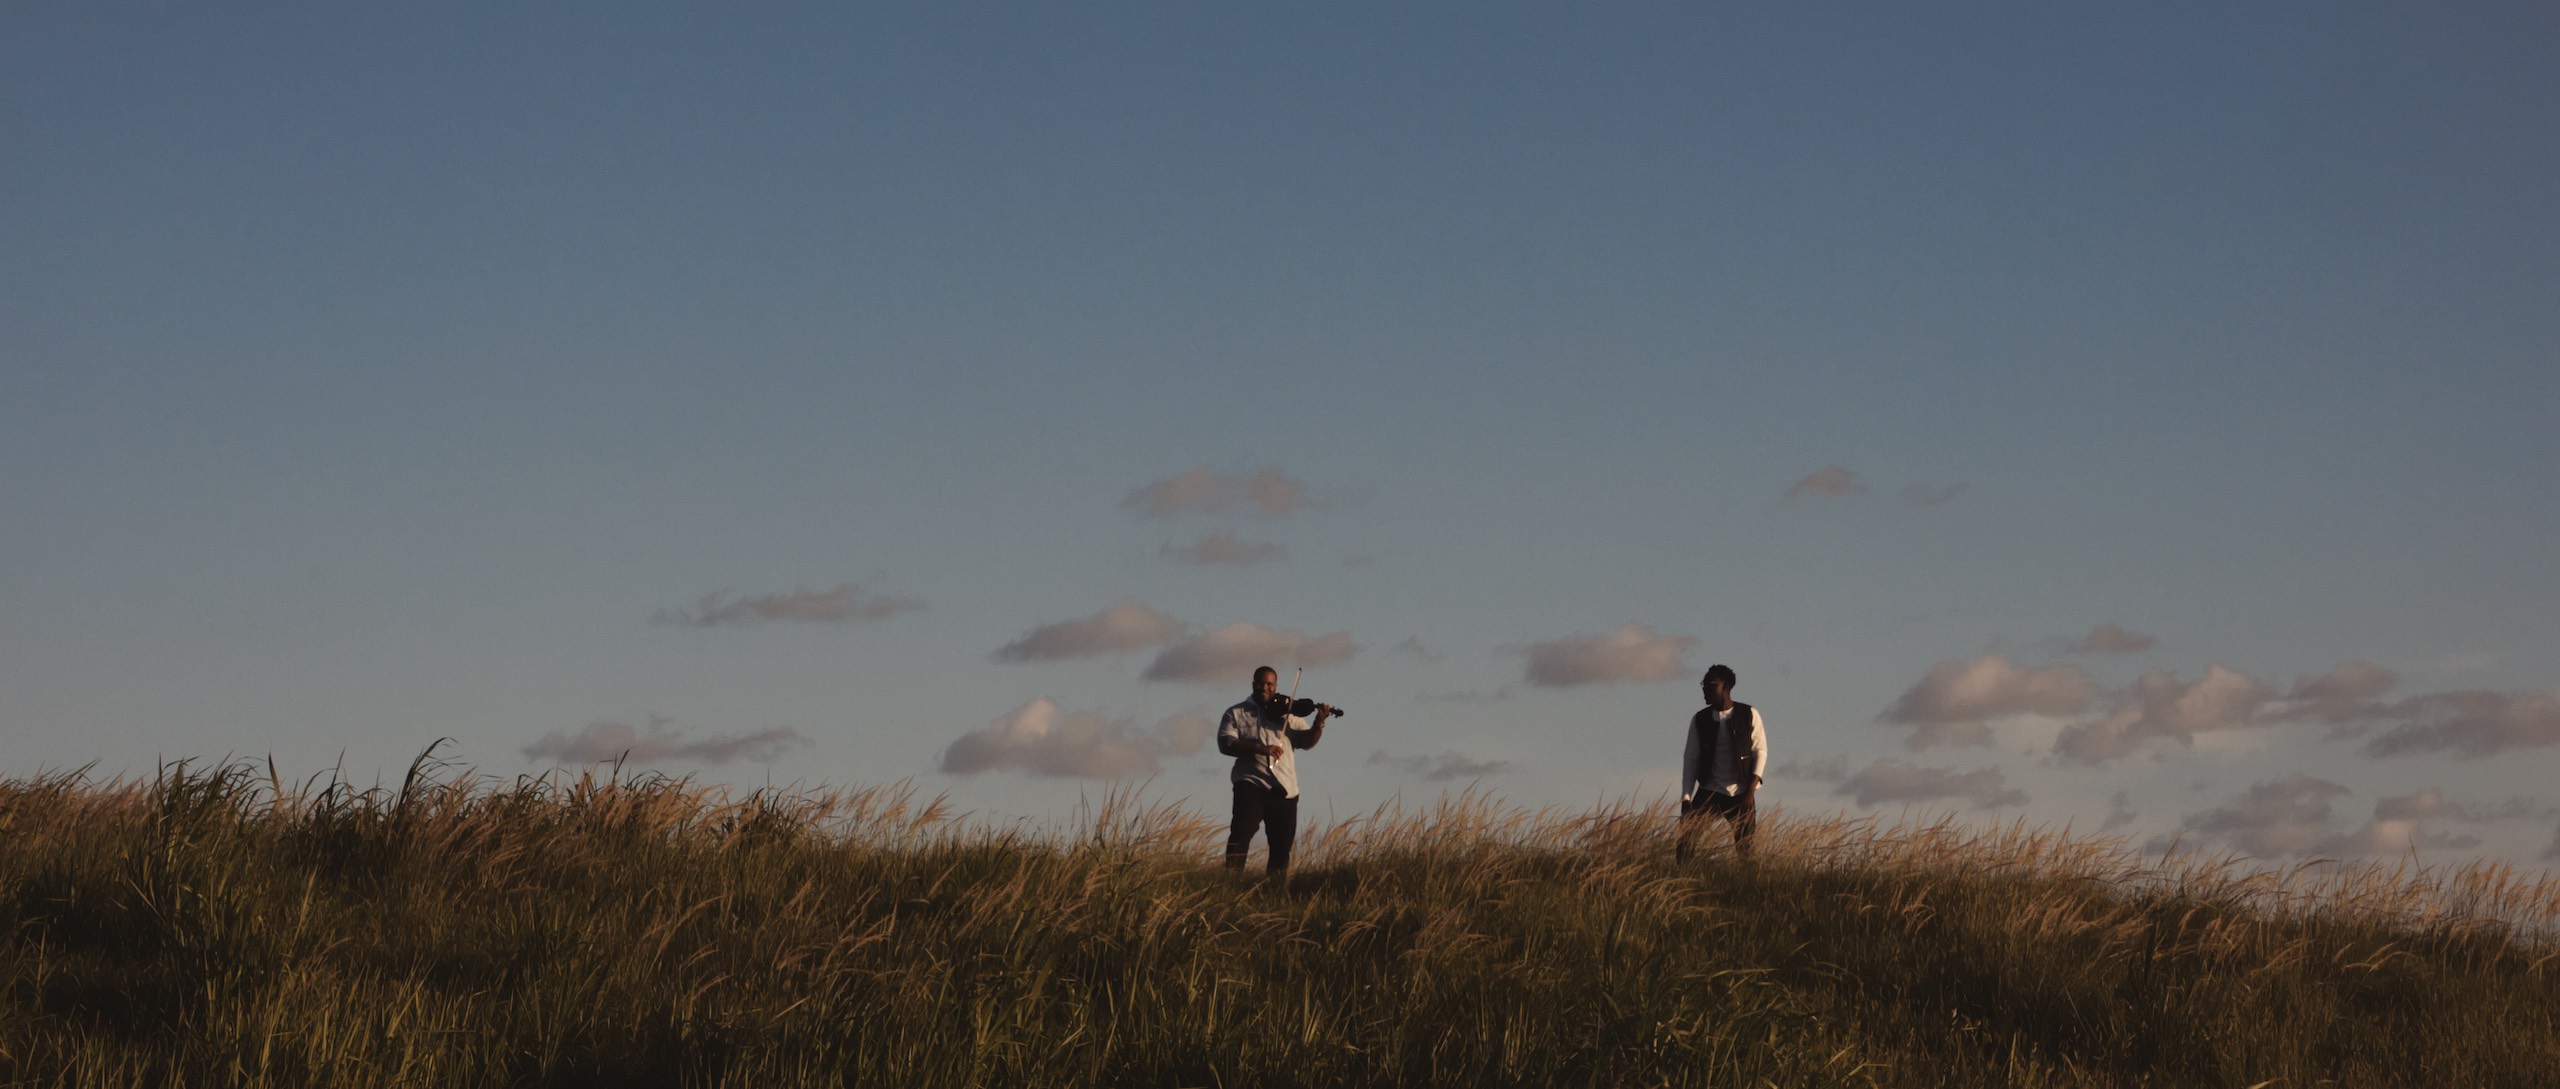 Black Violin Impossible is Possible Music Video with man playing violin in a field under cloudy blue skies as another man looks on